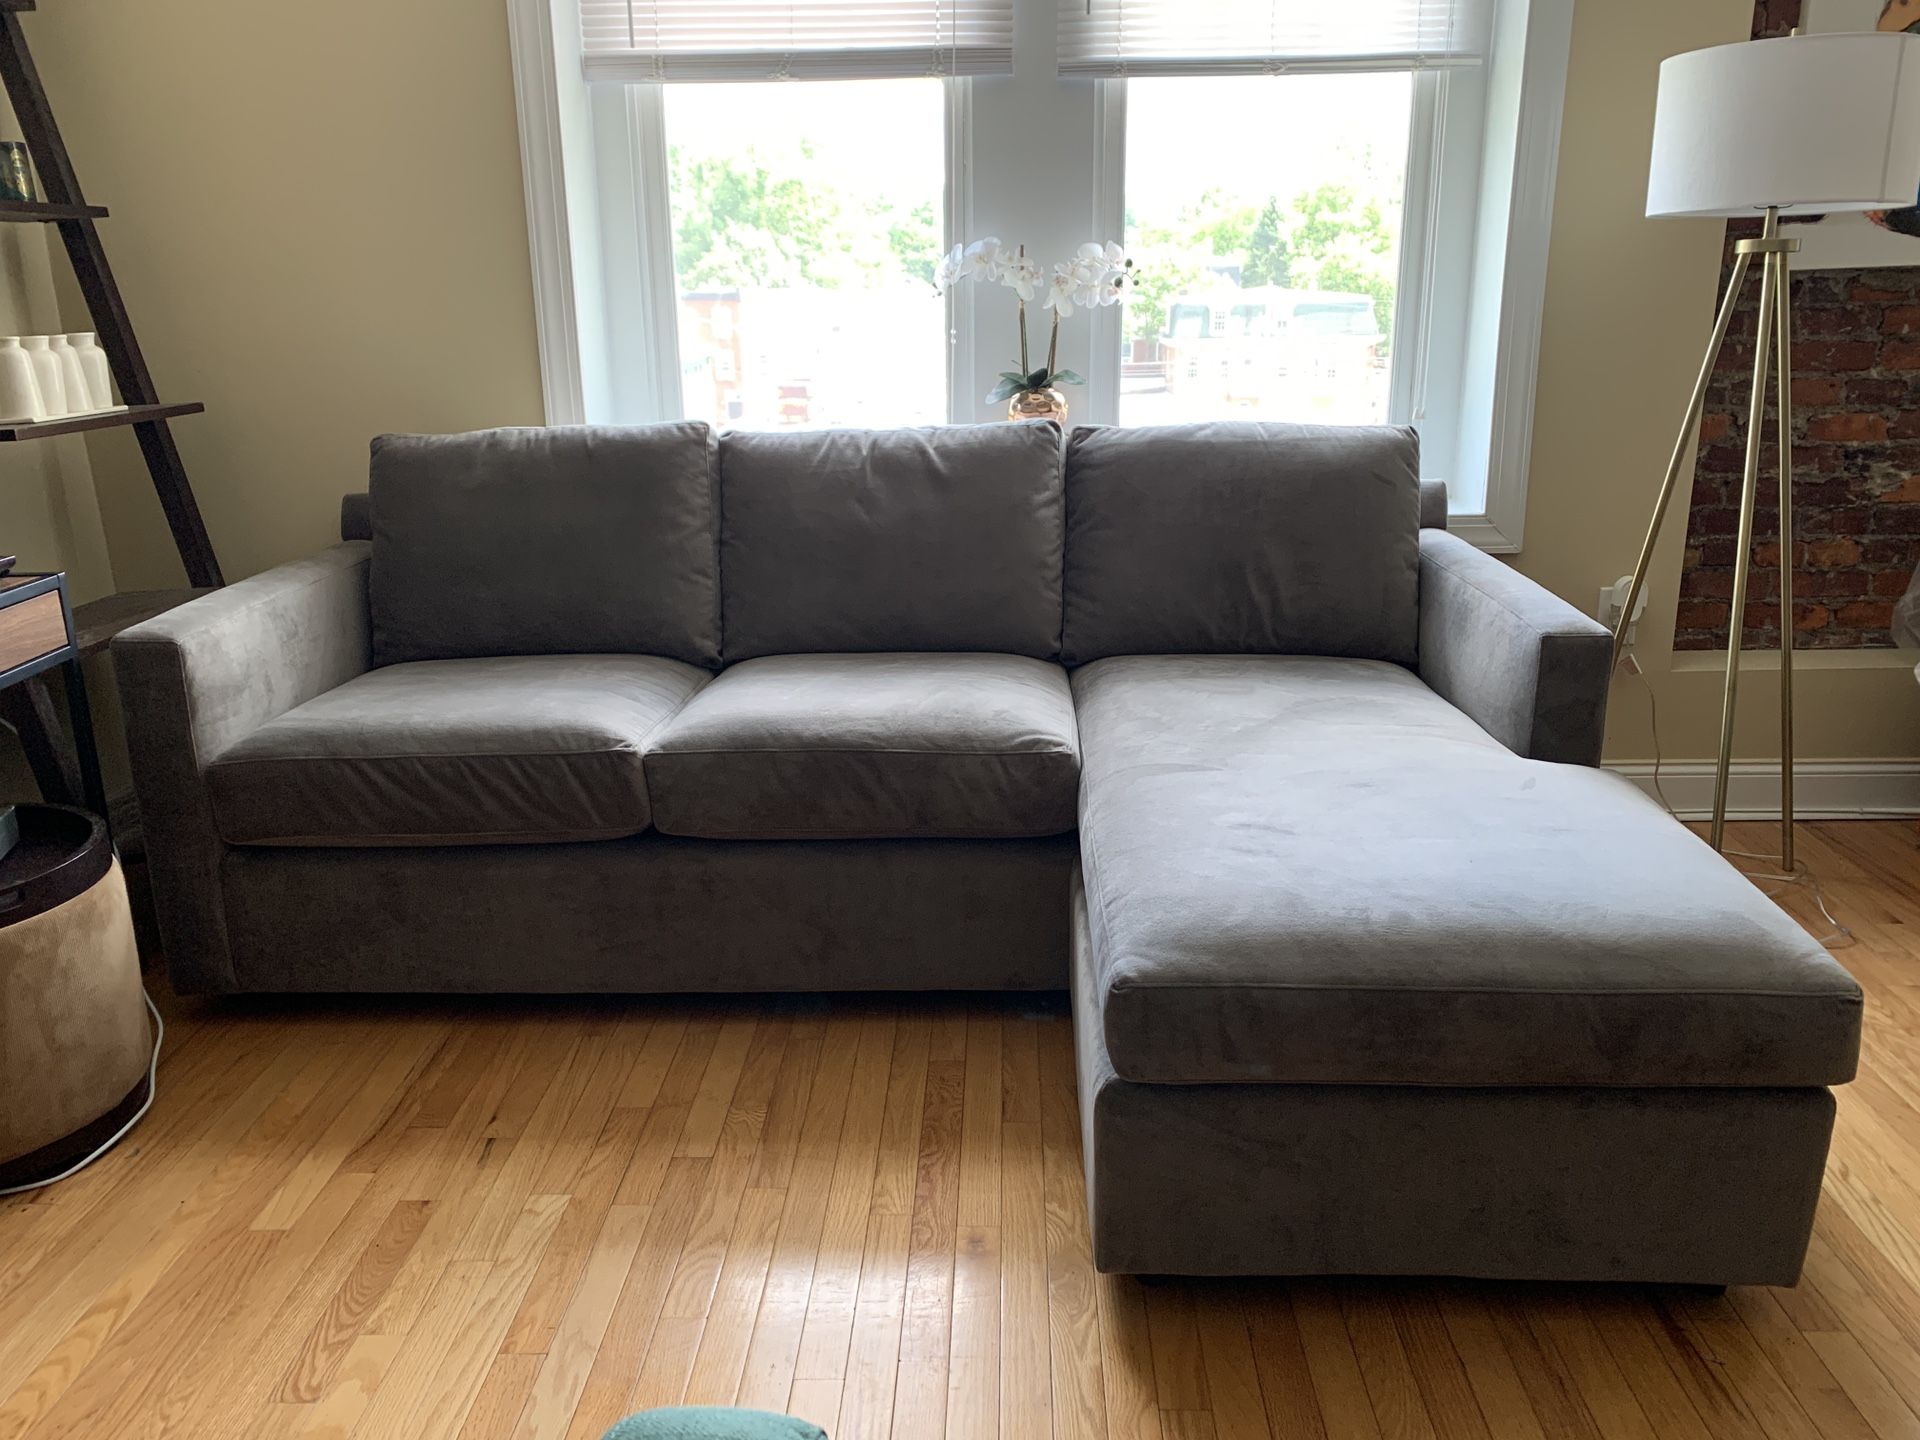 Crate and Barrel reversible sectional(NEW)